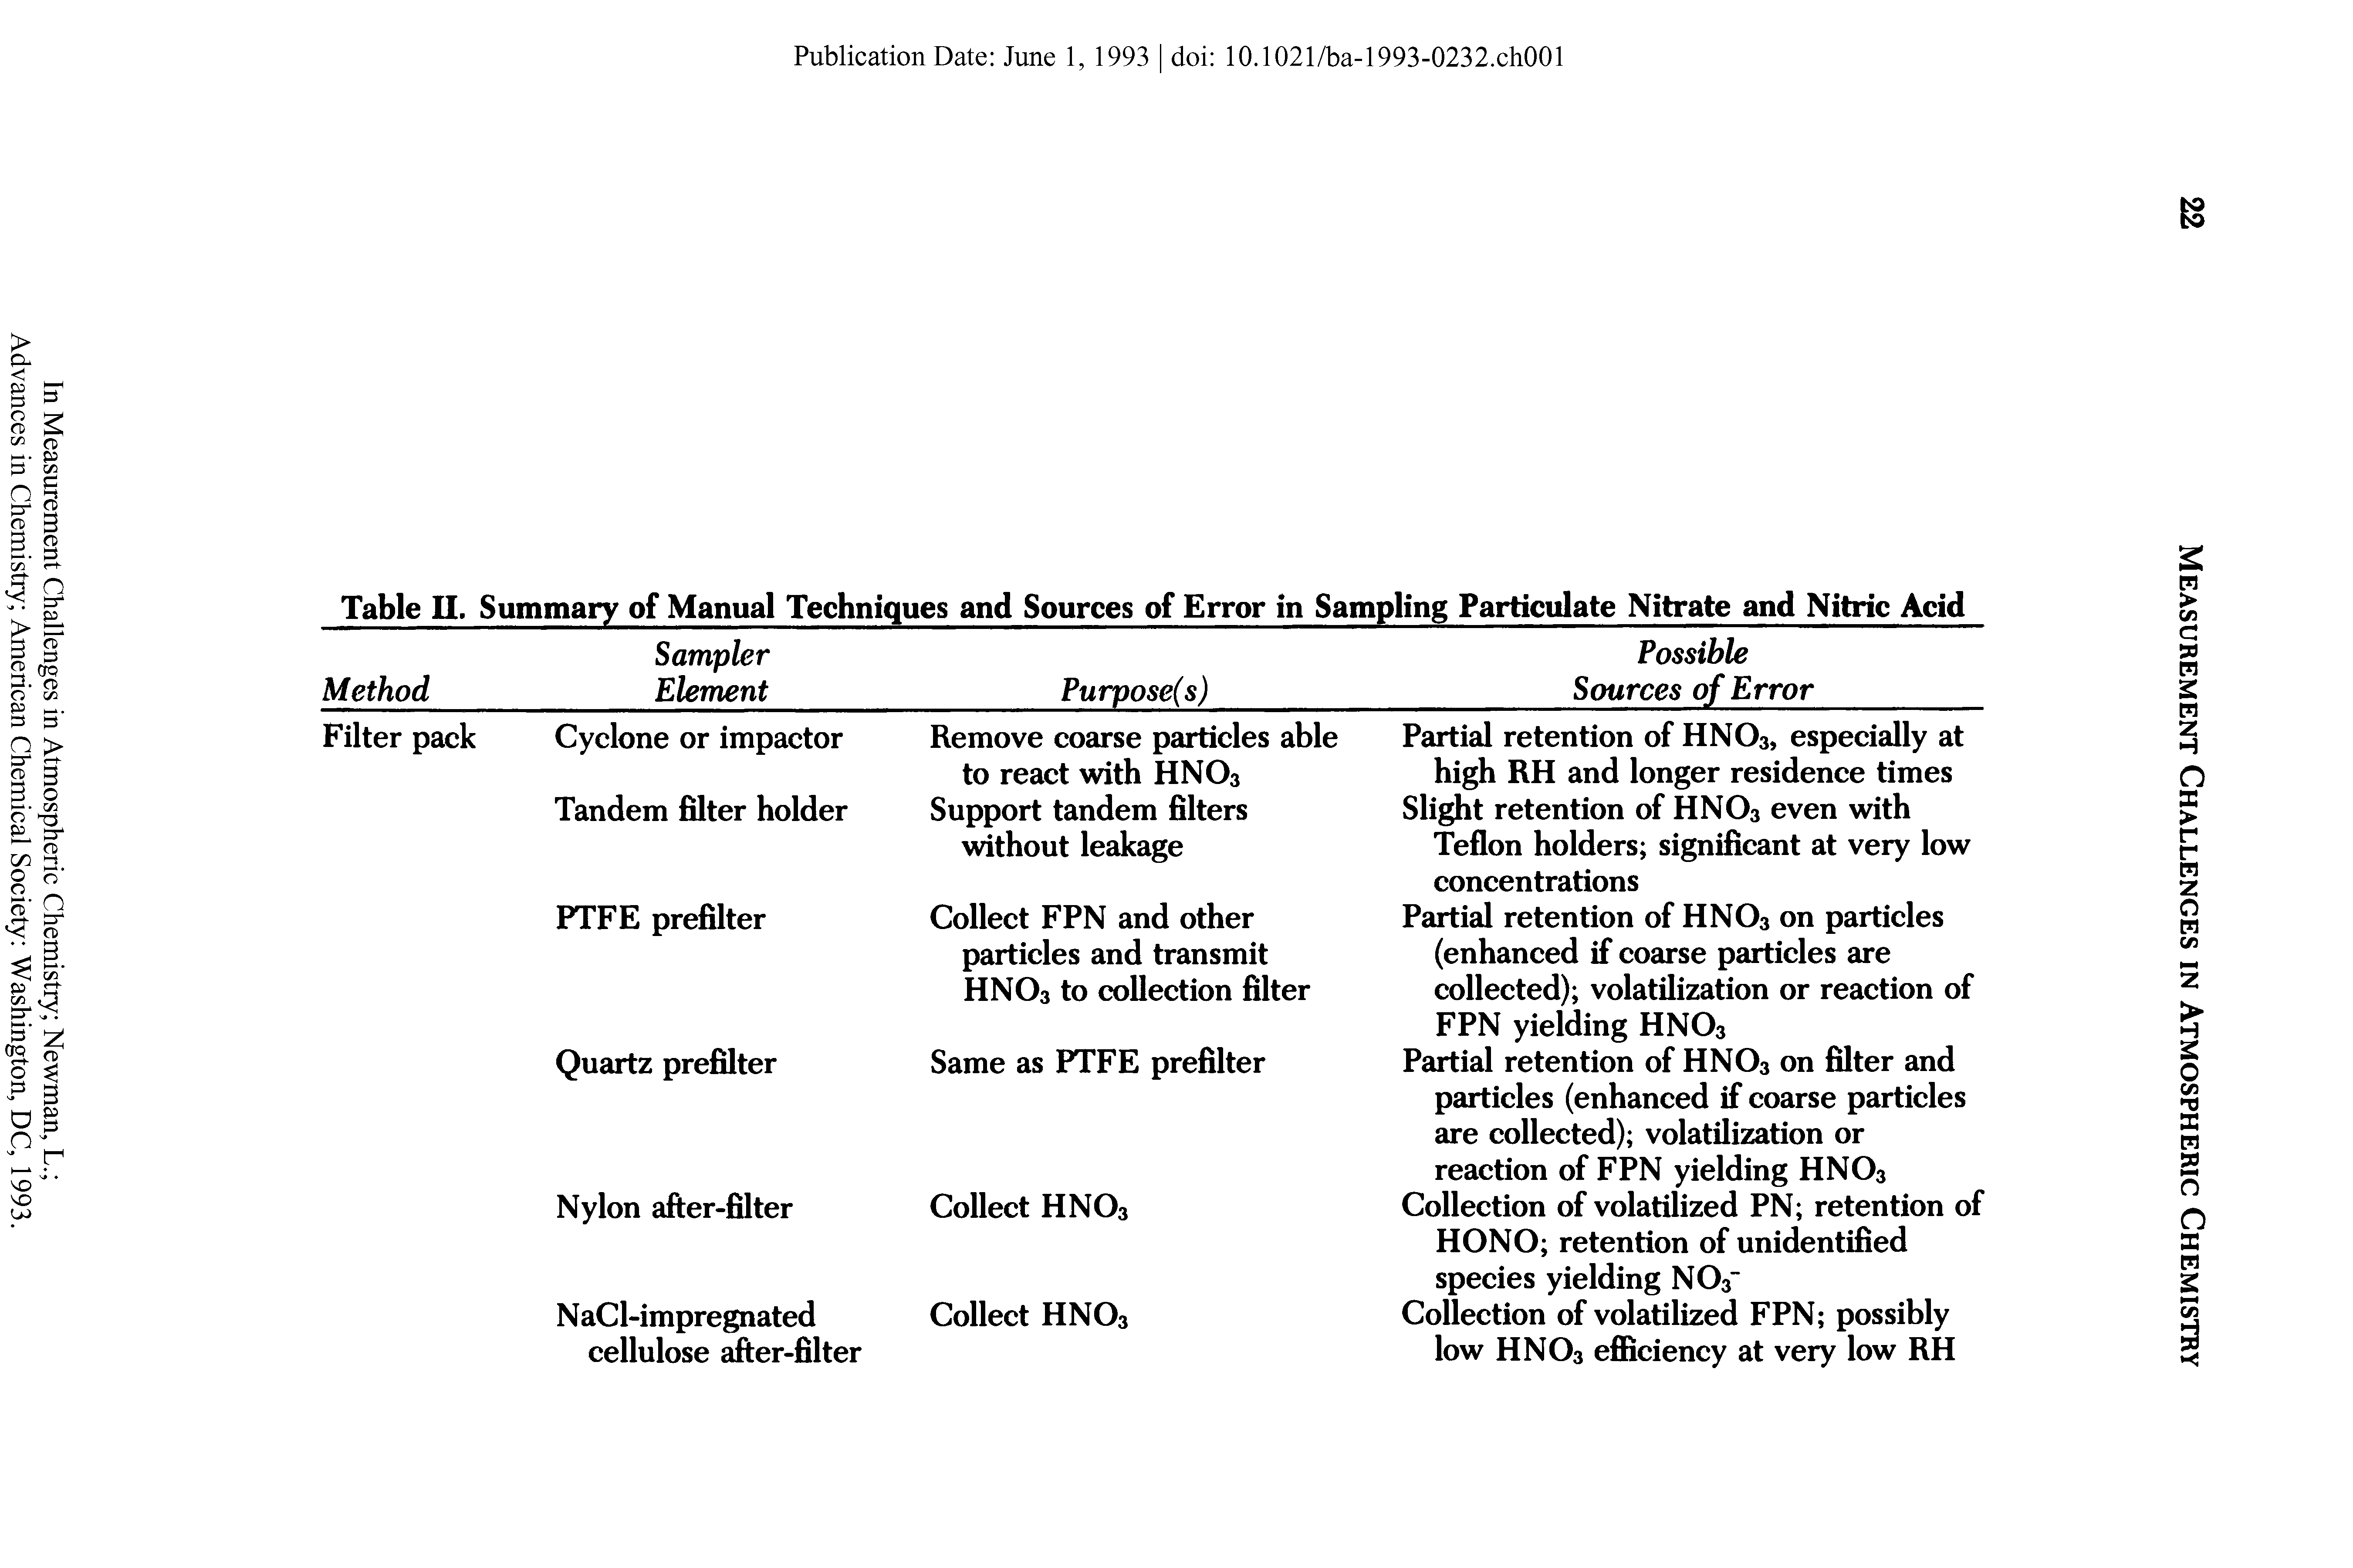 Table II. Summary of Manual Techniques and Sources of Error in Sampling Particulate Nitrate and Nitric Acid ...